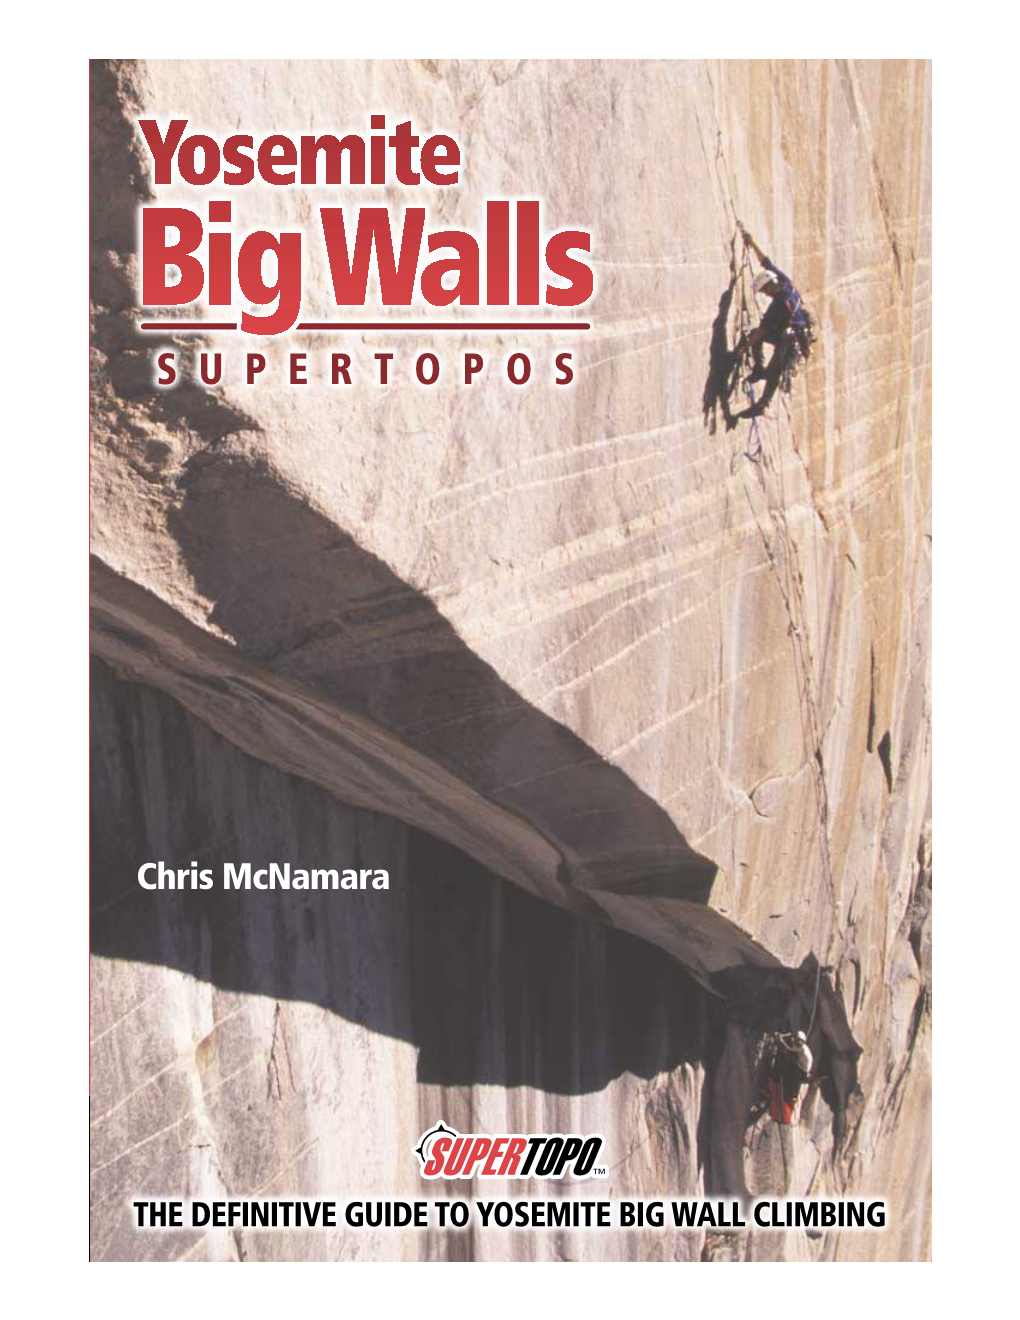 THE DEFINITIVE GUIDE to YOSEMITE BIG WALL CLIMBING Contents